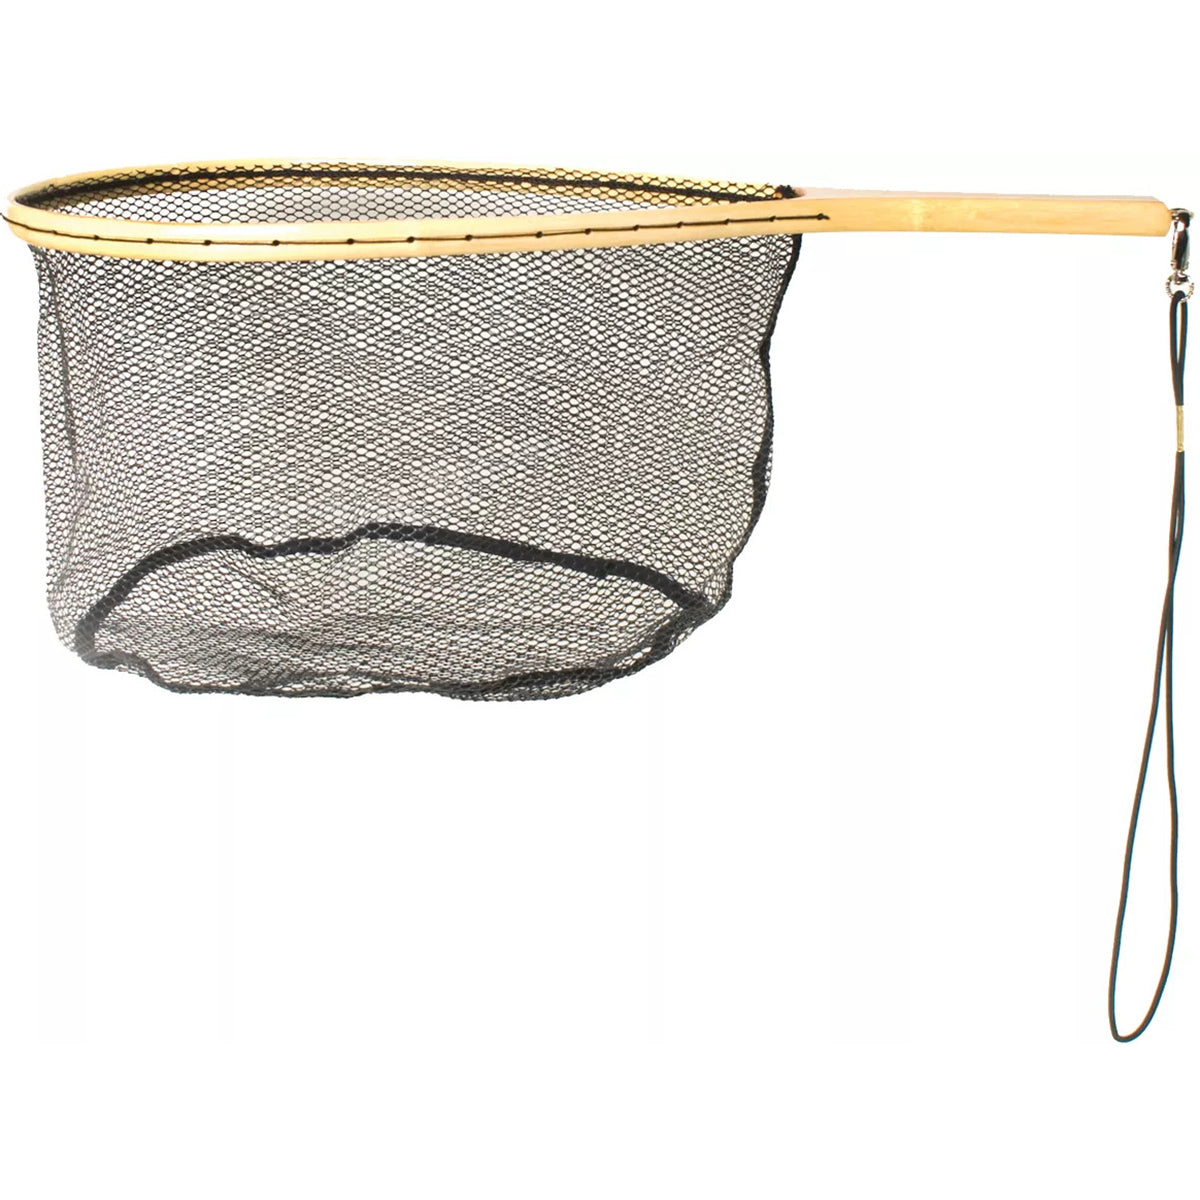 Eagle Claw Wood Trout Net with Rubberized Netting Eagle Claw